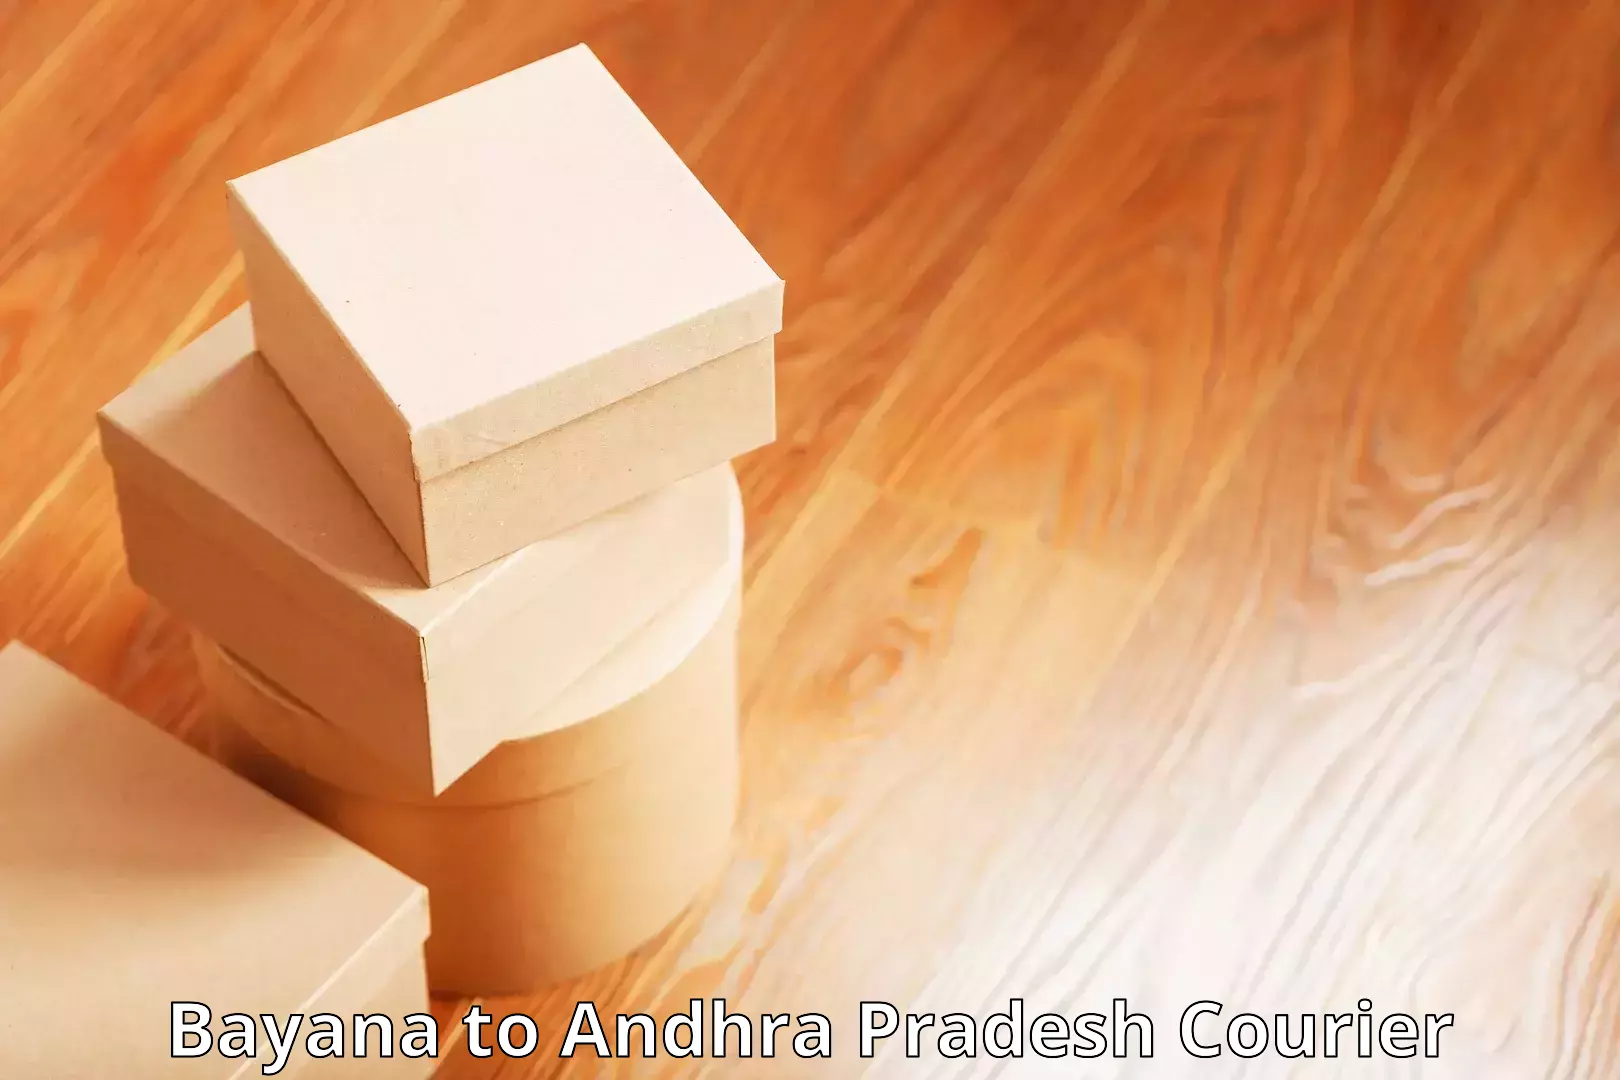 Residential courier service in Bayana to Rajahmundry